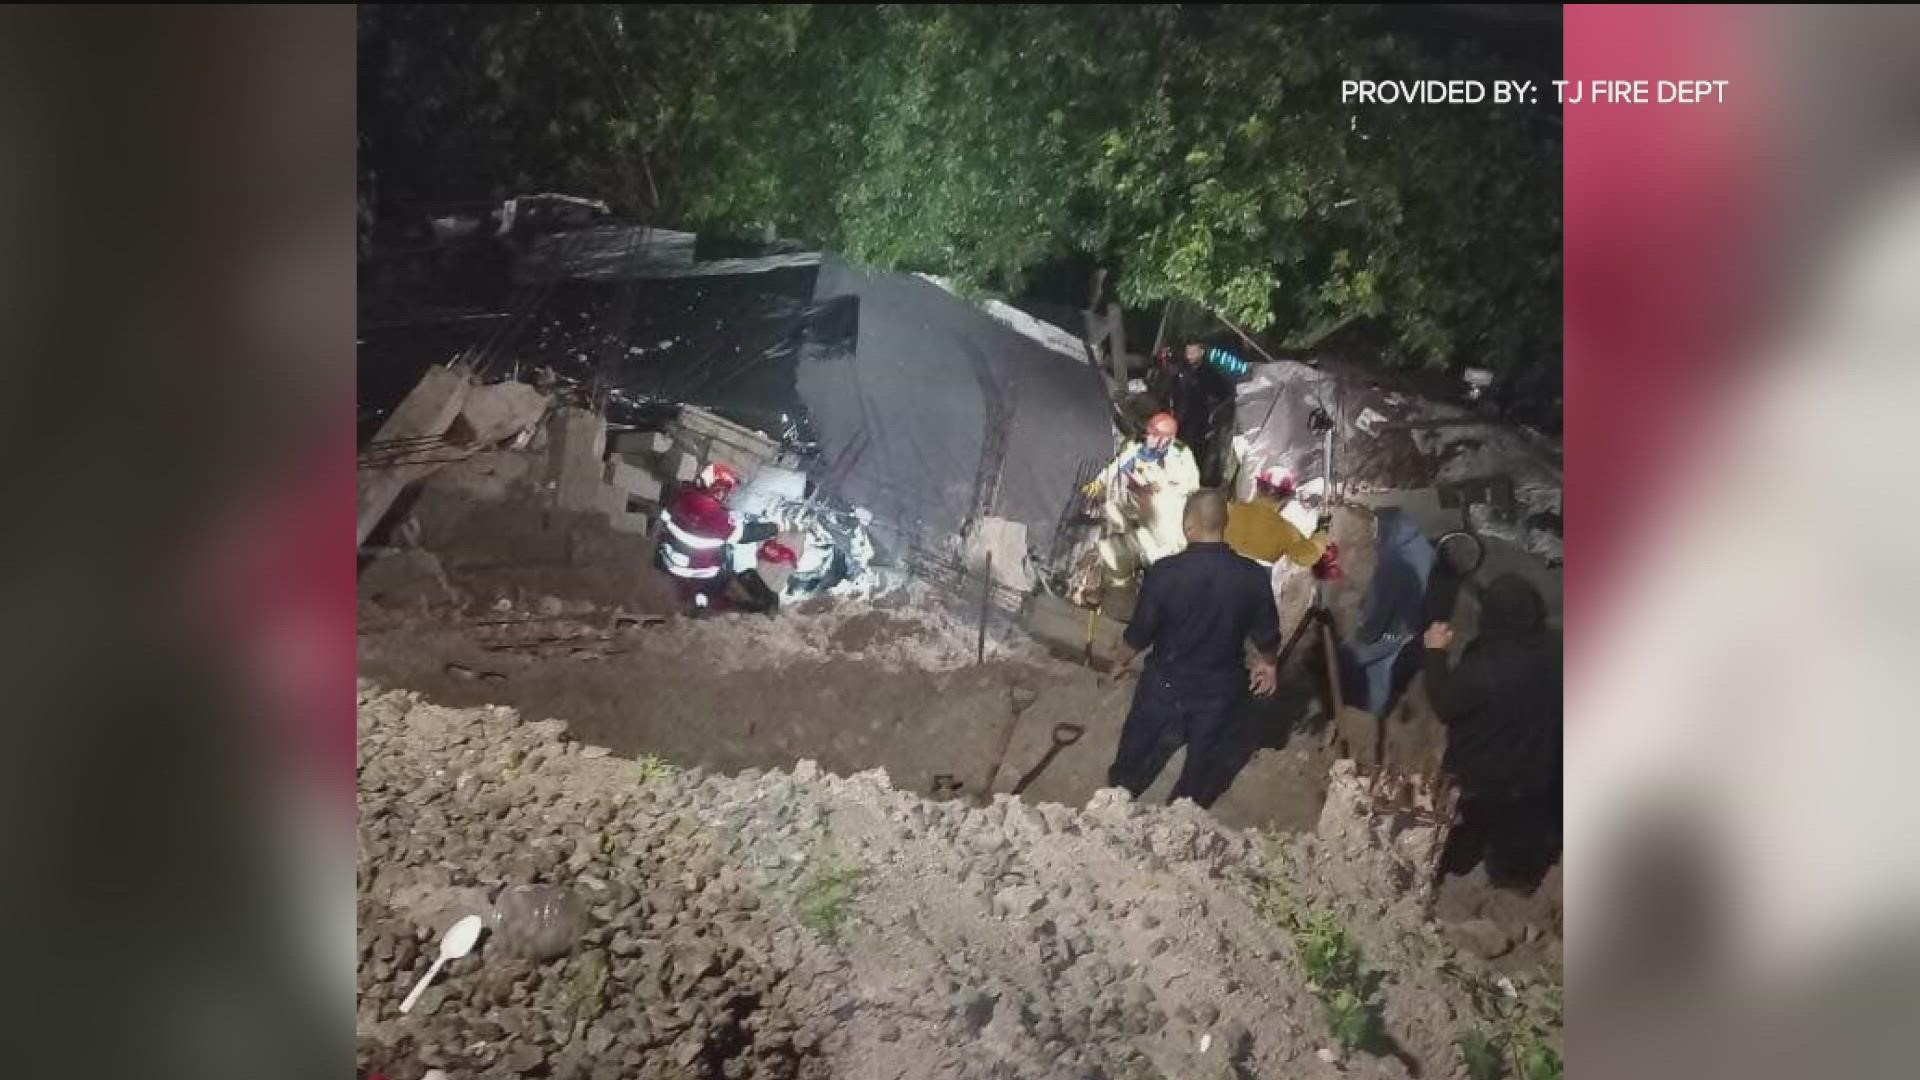 A 7-year-old and 14-year-old girl were killed in Tijuana after a slope collapse caused a wall to fall on their home, according to the Mayor of Tijuana.